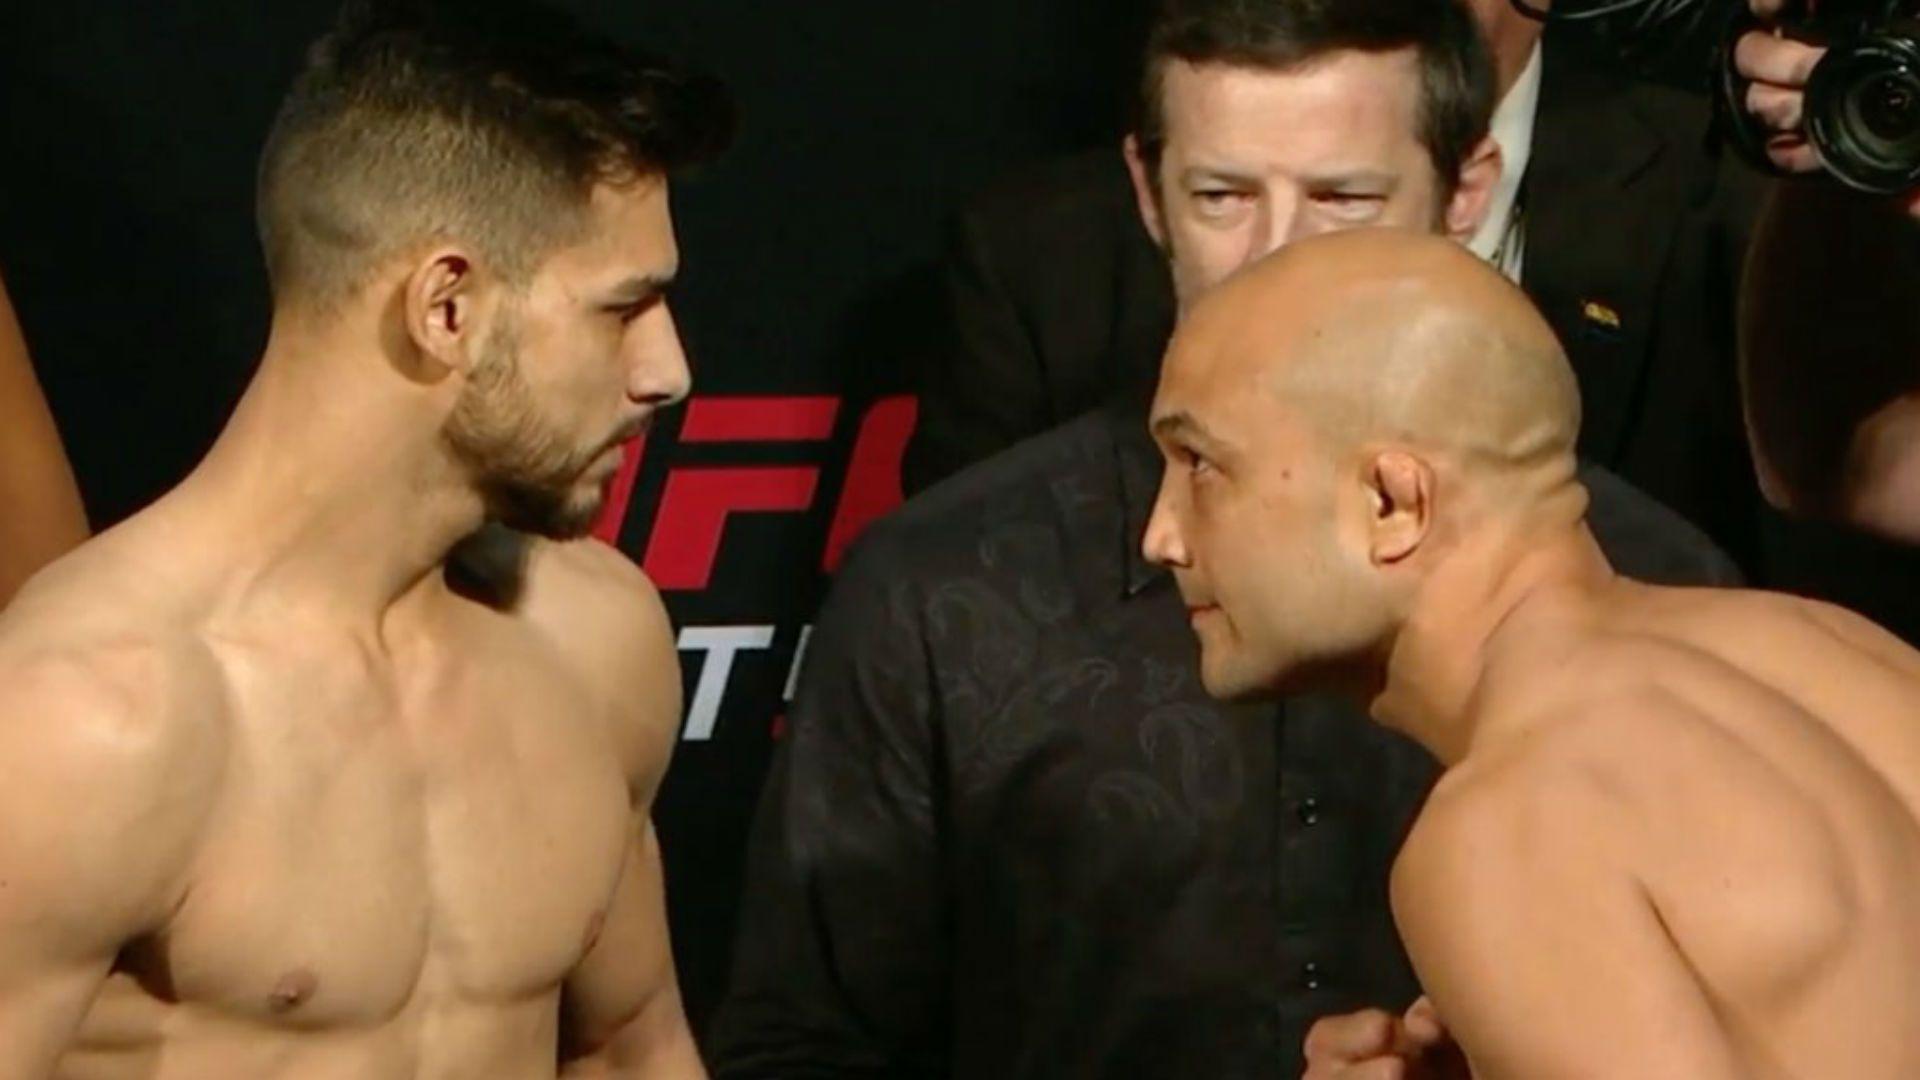 WATCH: BJ Penn Weighs In After Two And A Half Year Absence. MMA